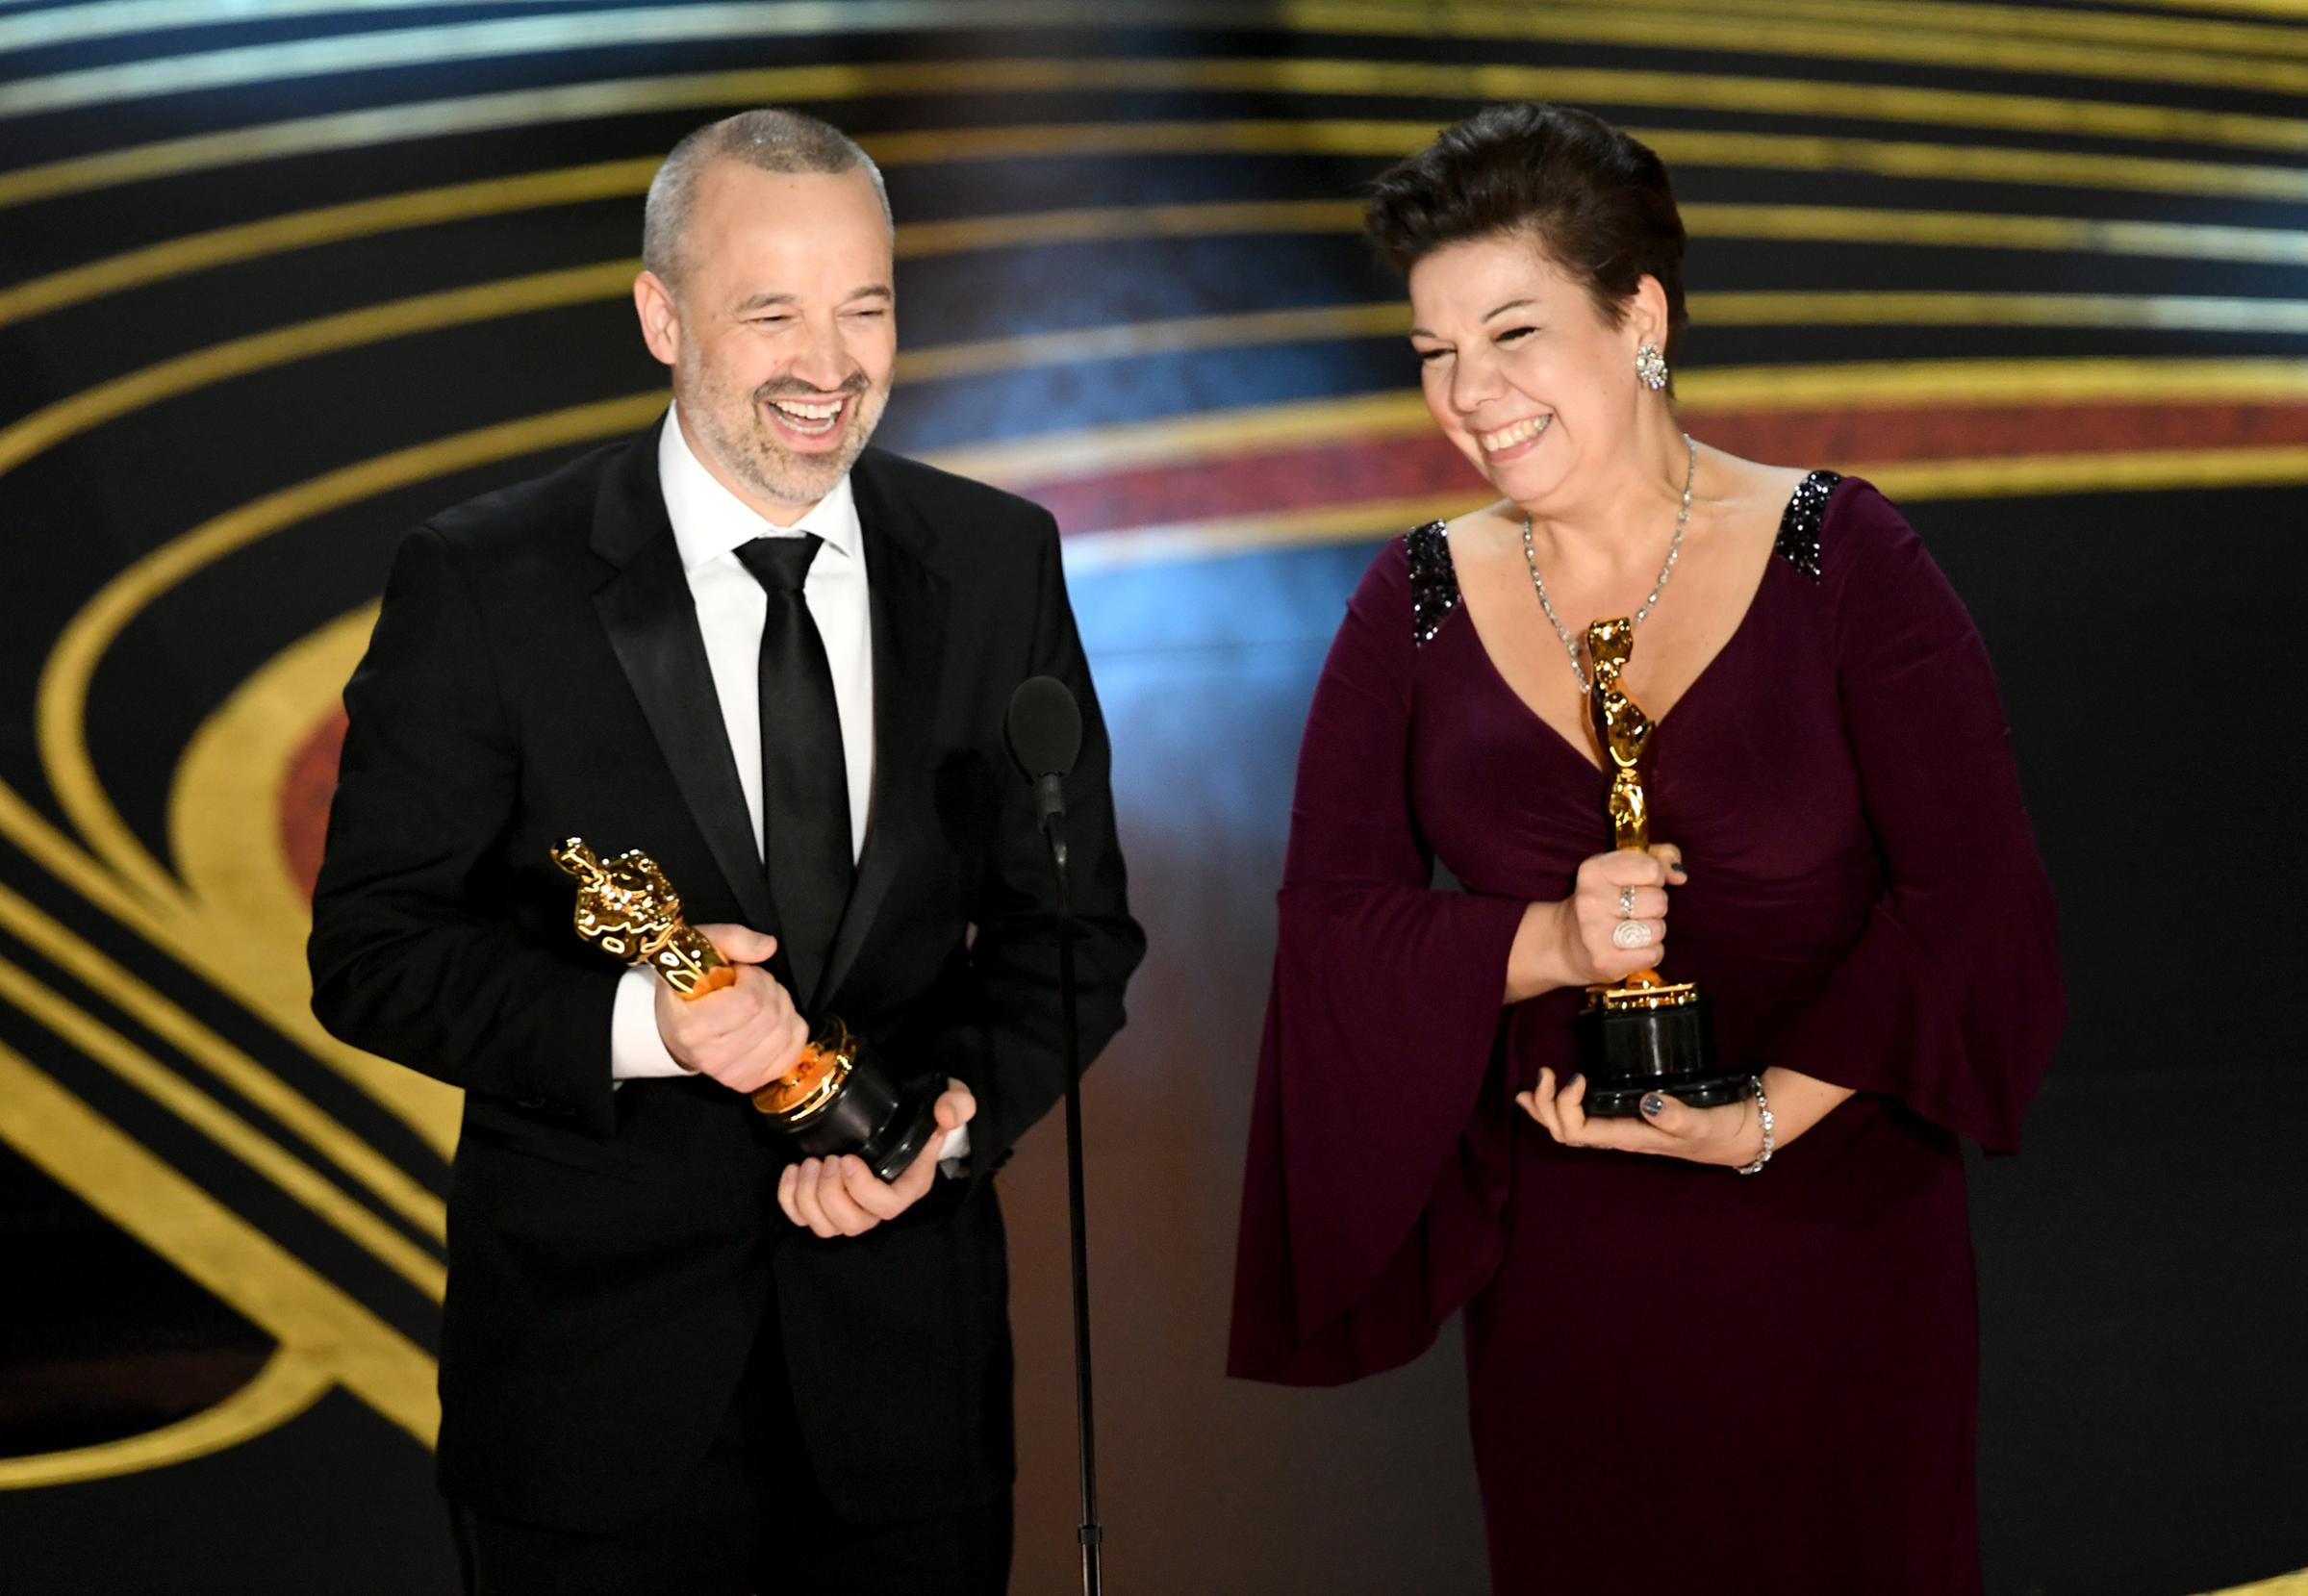 John Warhurst and Nina Hartstone accept the Sound Editing award for 'Bohemian Rhapsody' onstage during the 91st Annual Academy Awards at Dolby Theatre on Feb. 24, 2019.